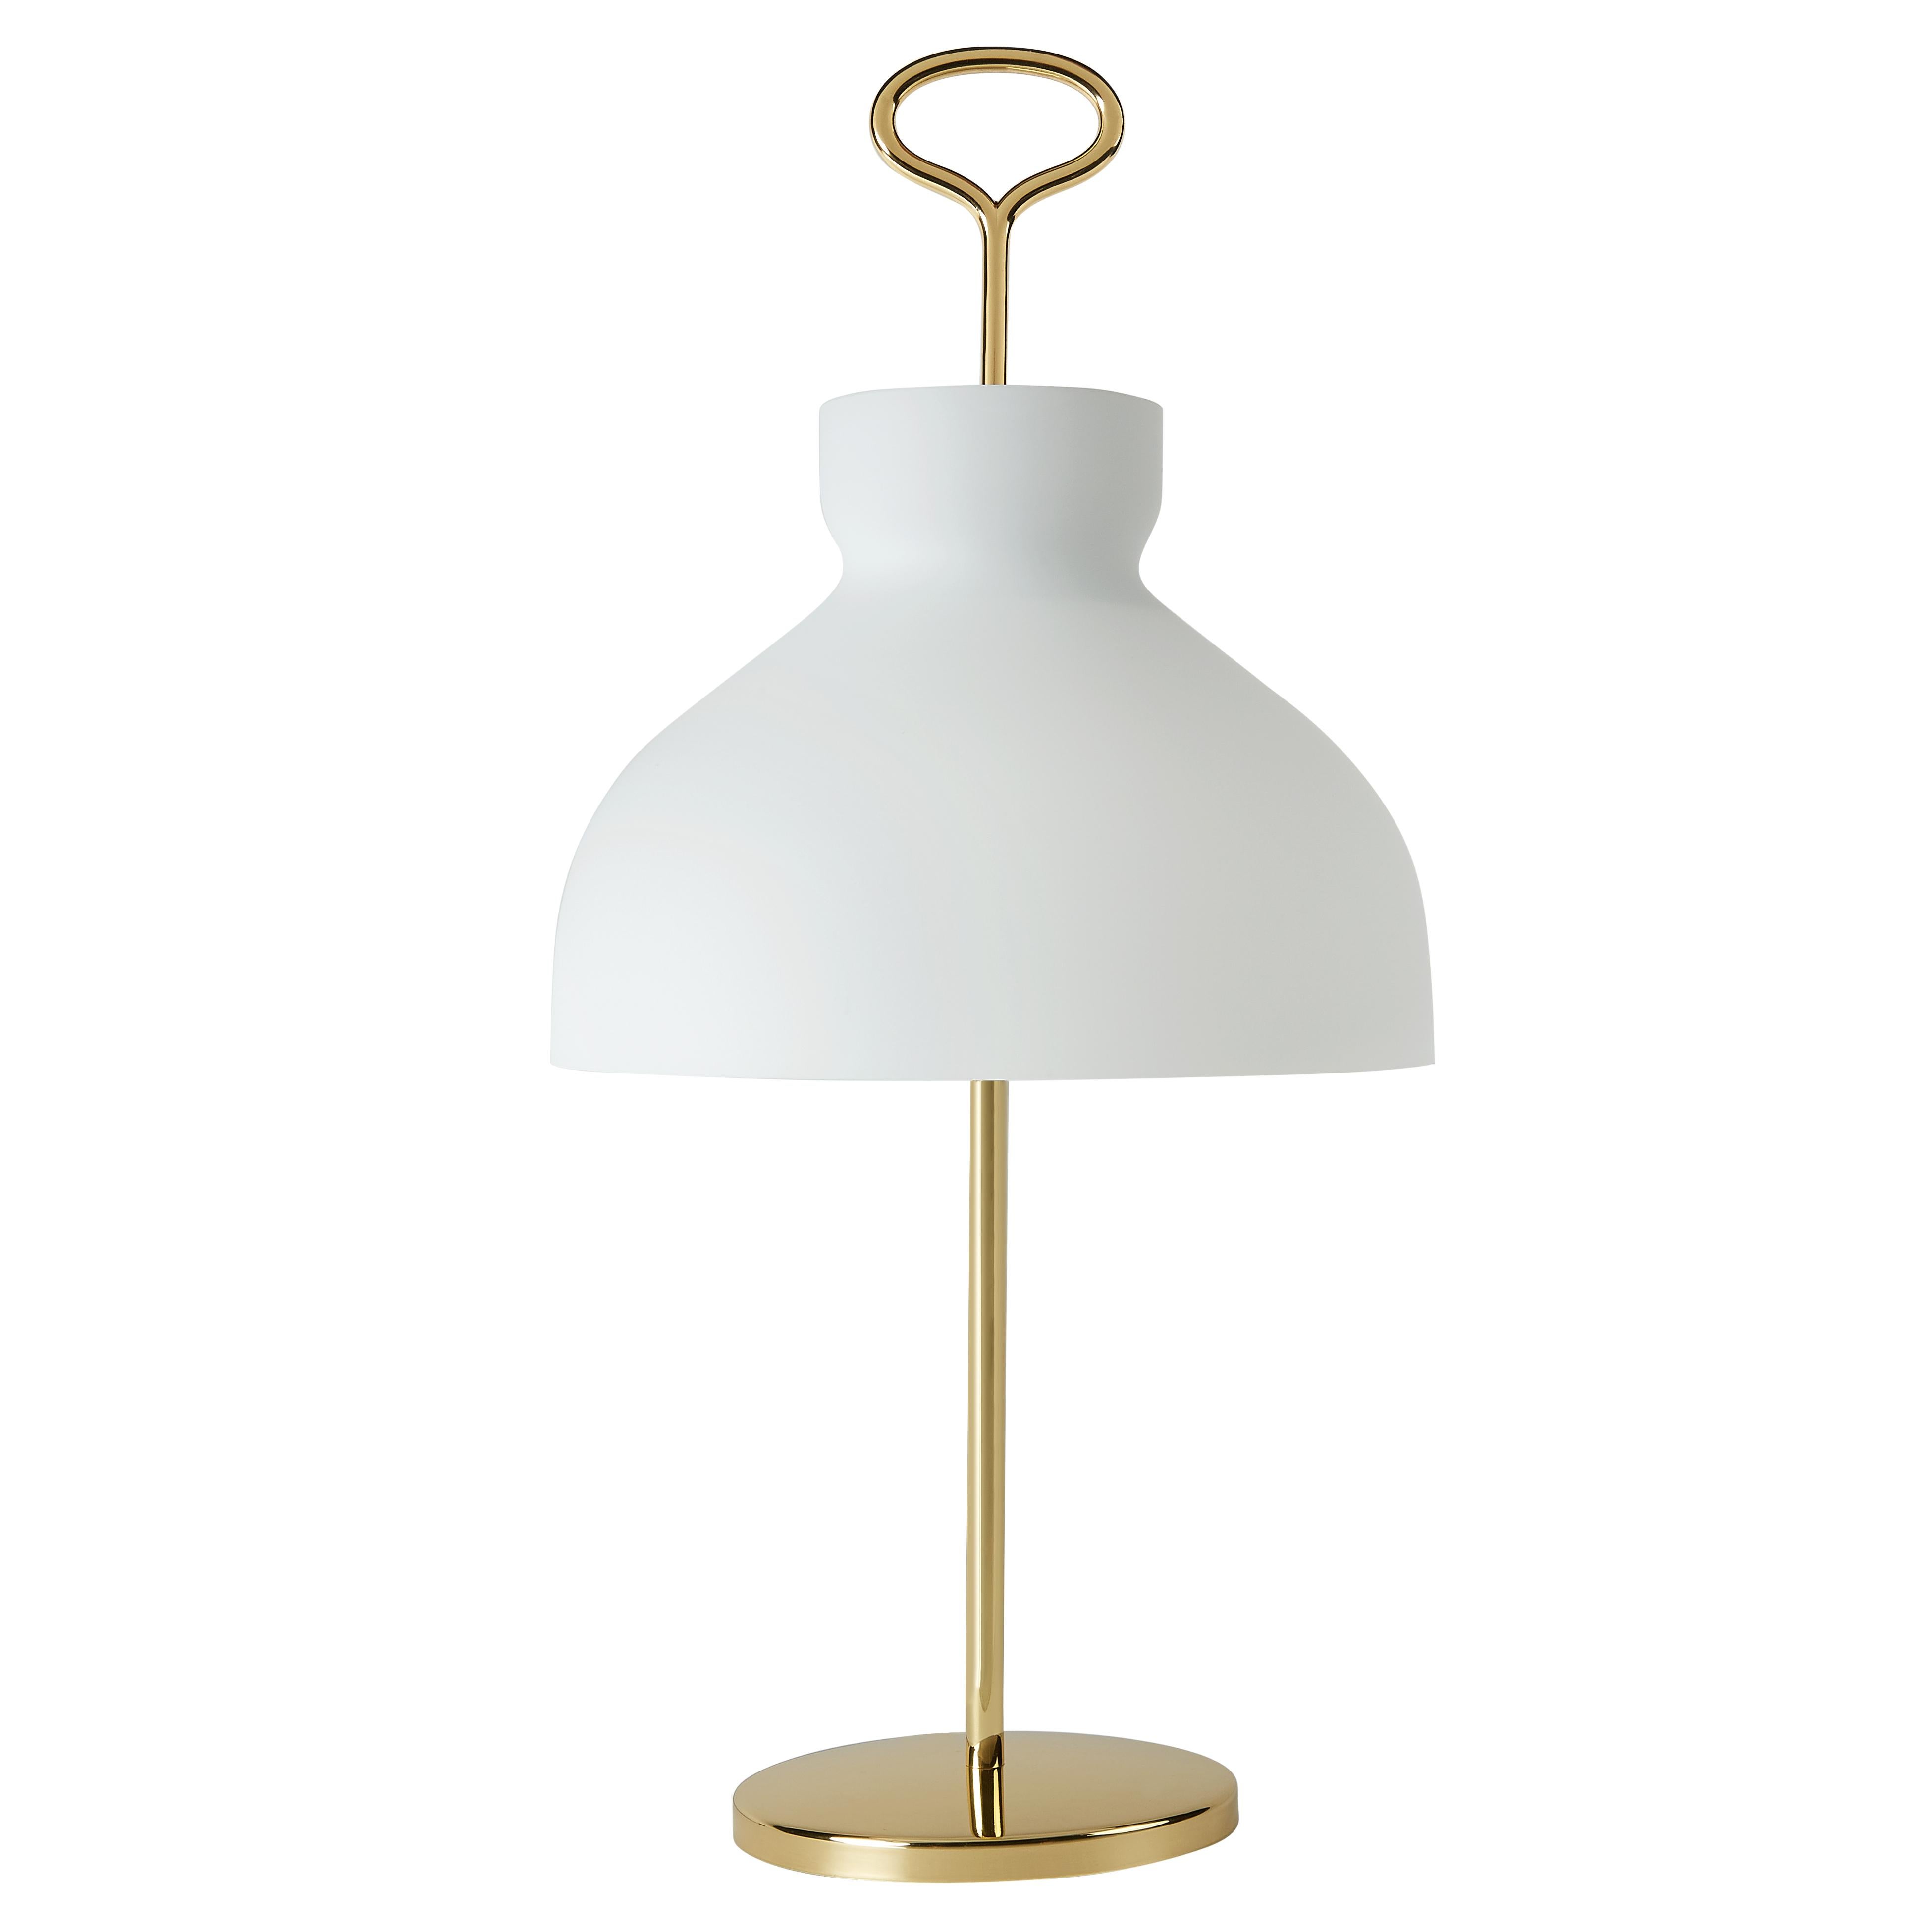 Opaline Glass Large Ignazio Gardella 'Arenzano' Table Lamp in Satin Nickel and Glass For Sale